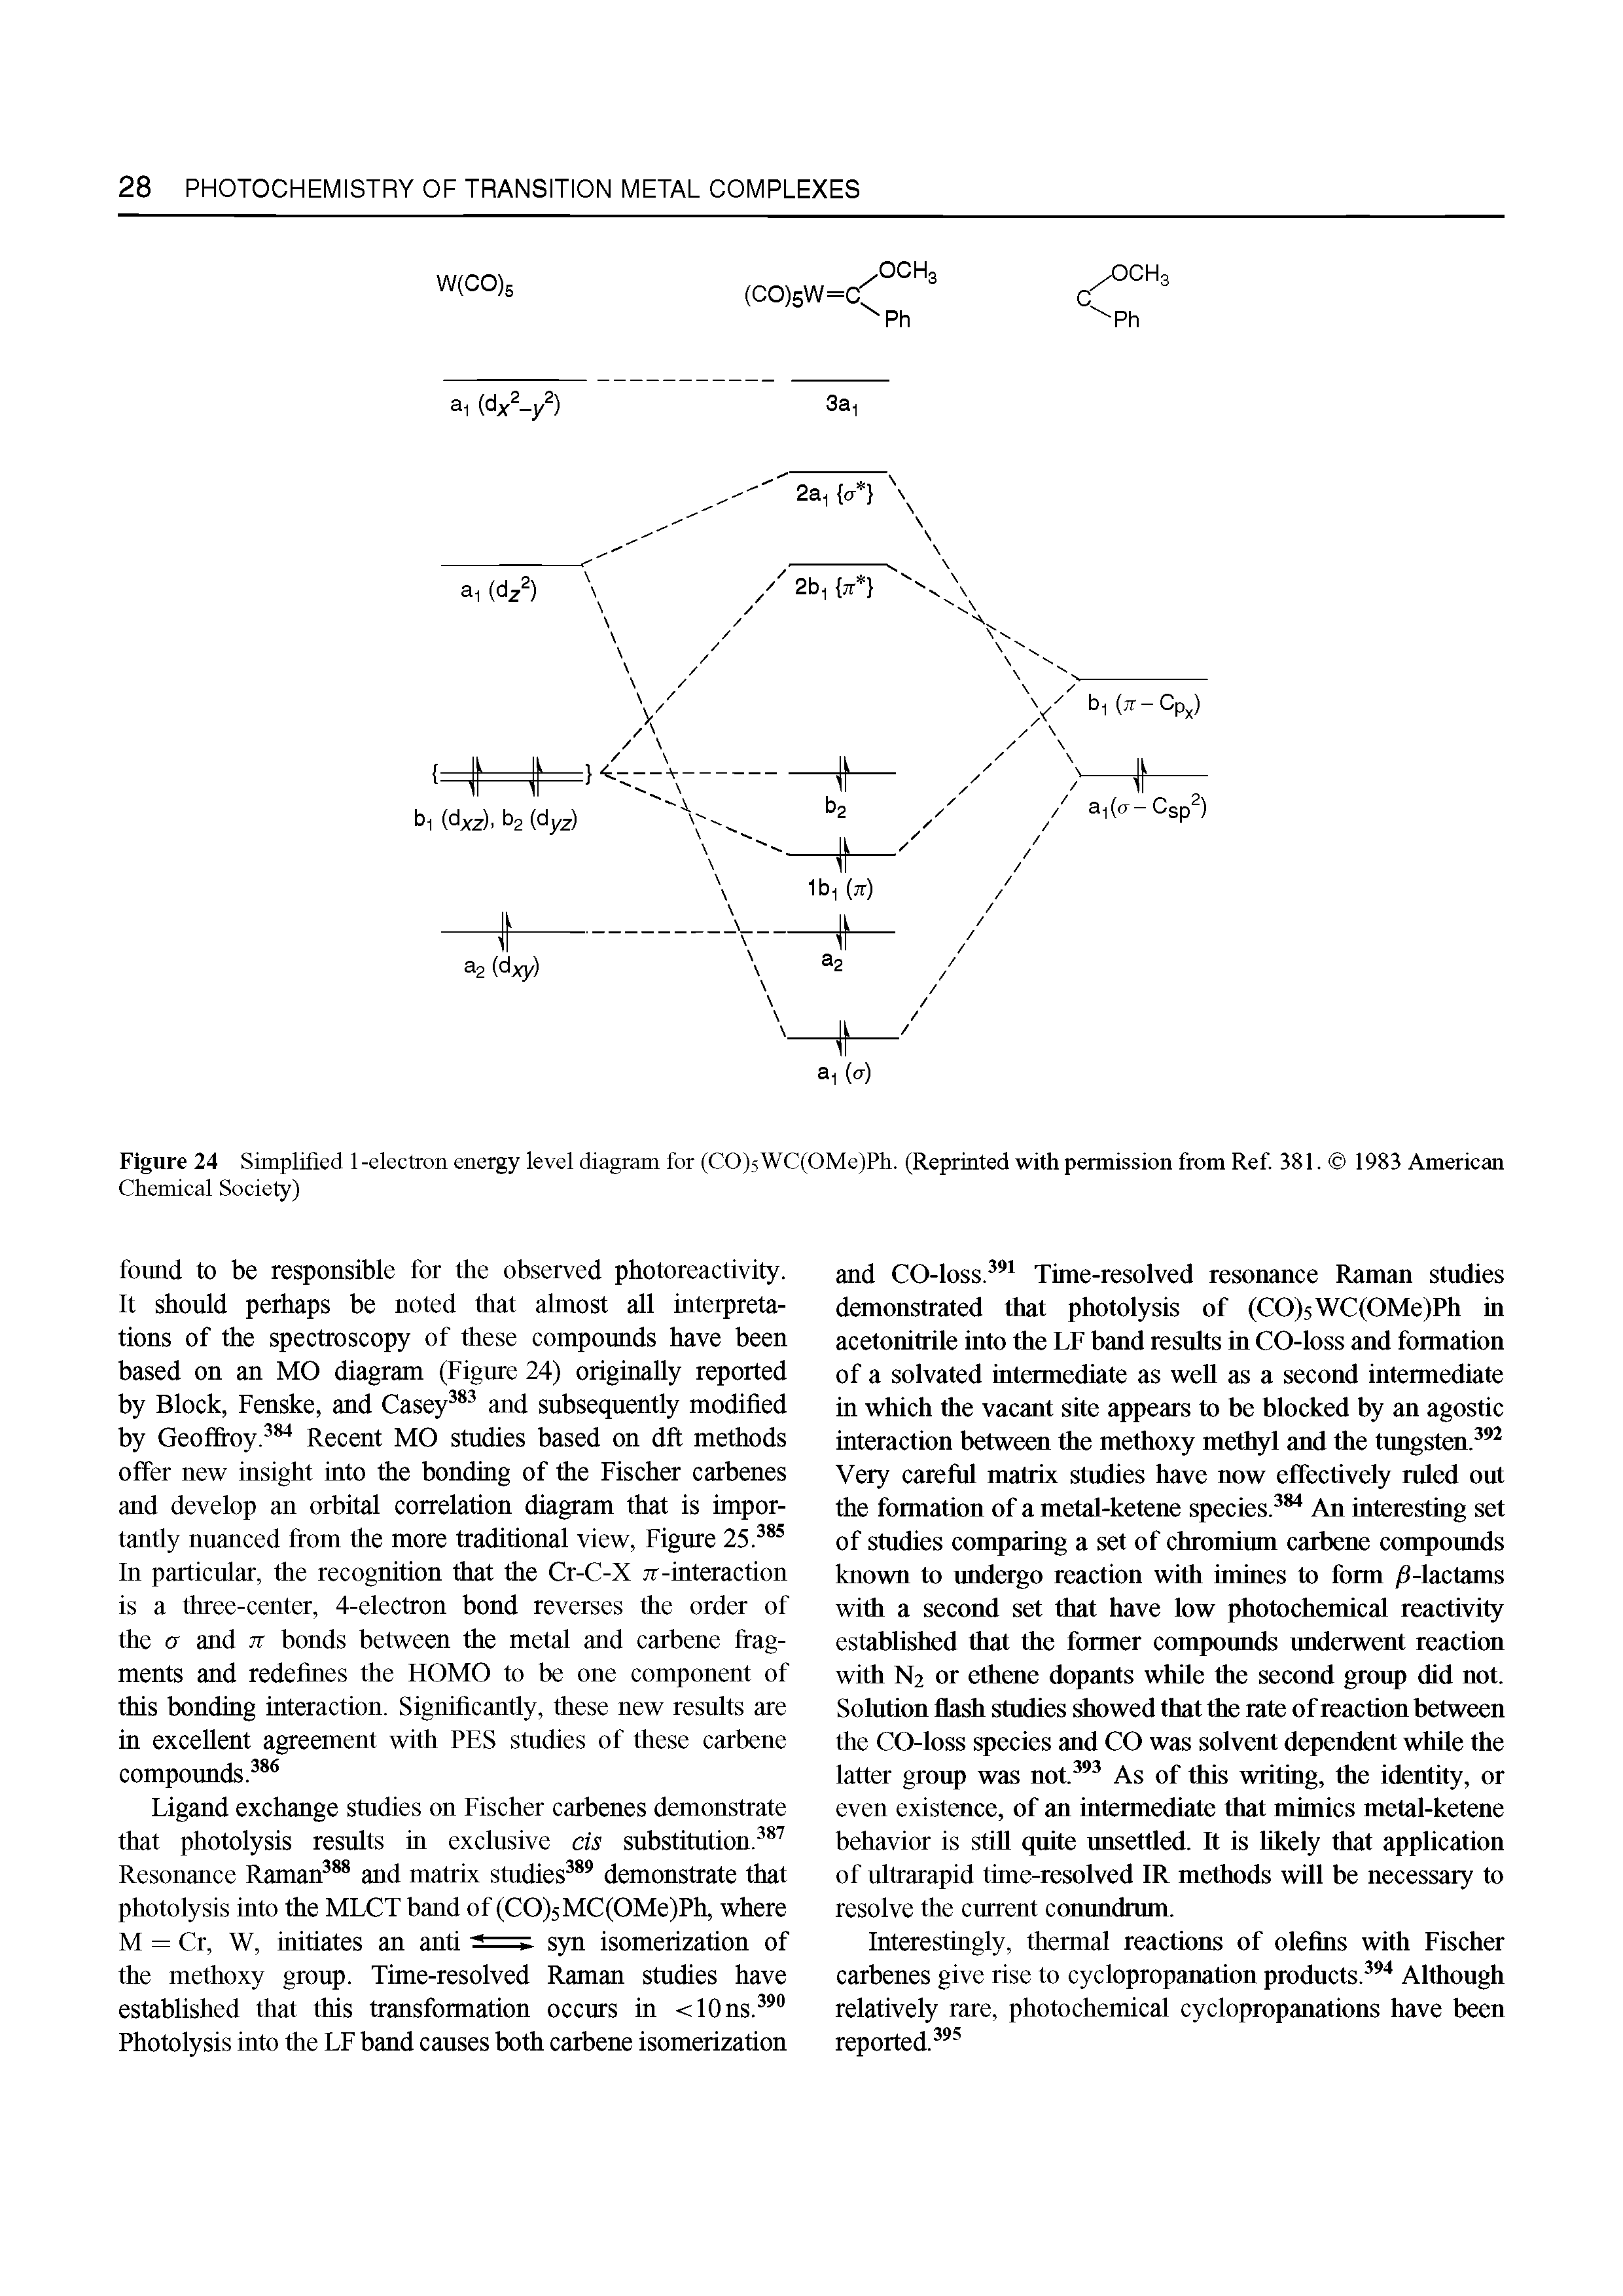 Figure 24 Simplified 1-electron energy level diagram for (CO)5WC(OMe)Ph. (Reprinted with permission from Ref. 381. 1983 American Chemical Society)...